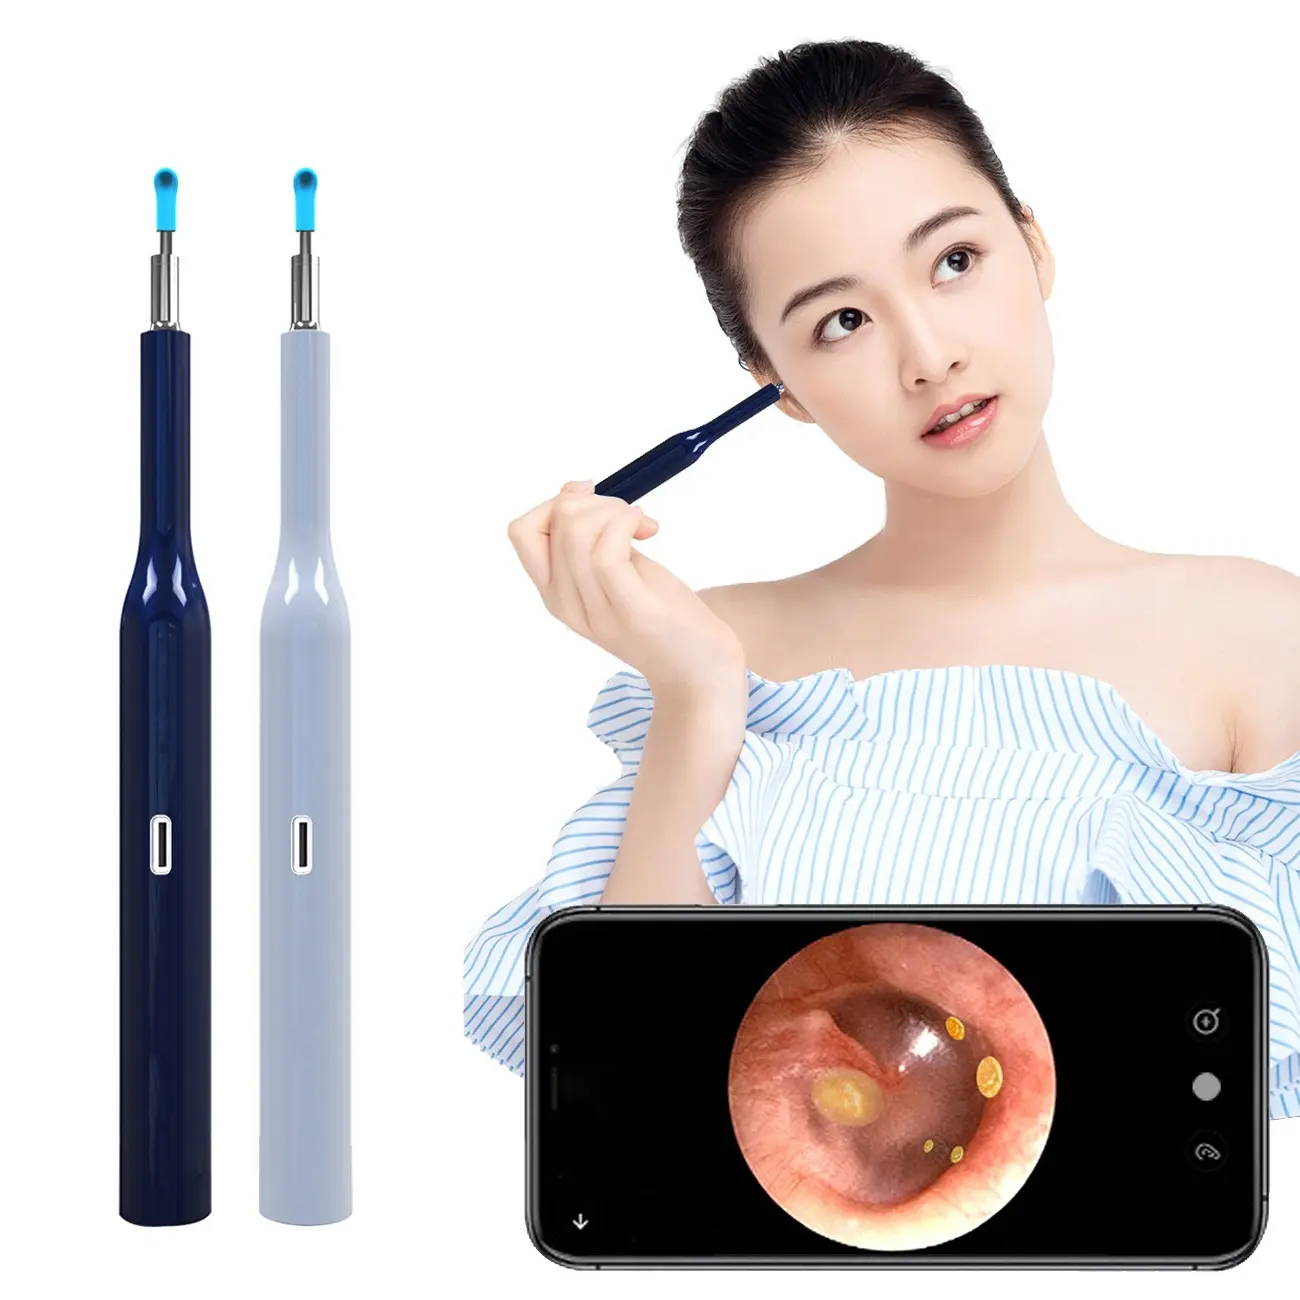 wifi ear wax removal tool health safe ear pick tool hd endoscope camera electronic spiral ear cleaner